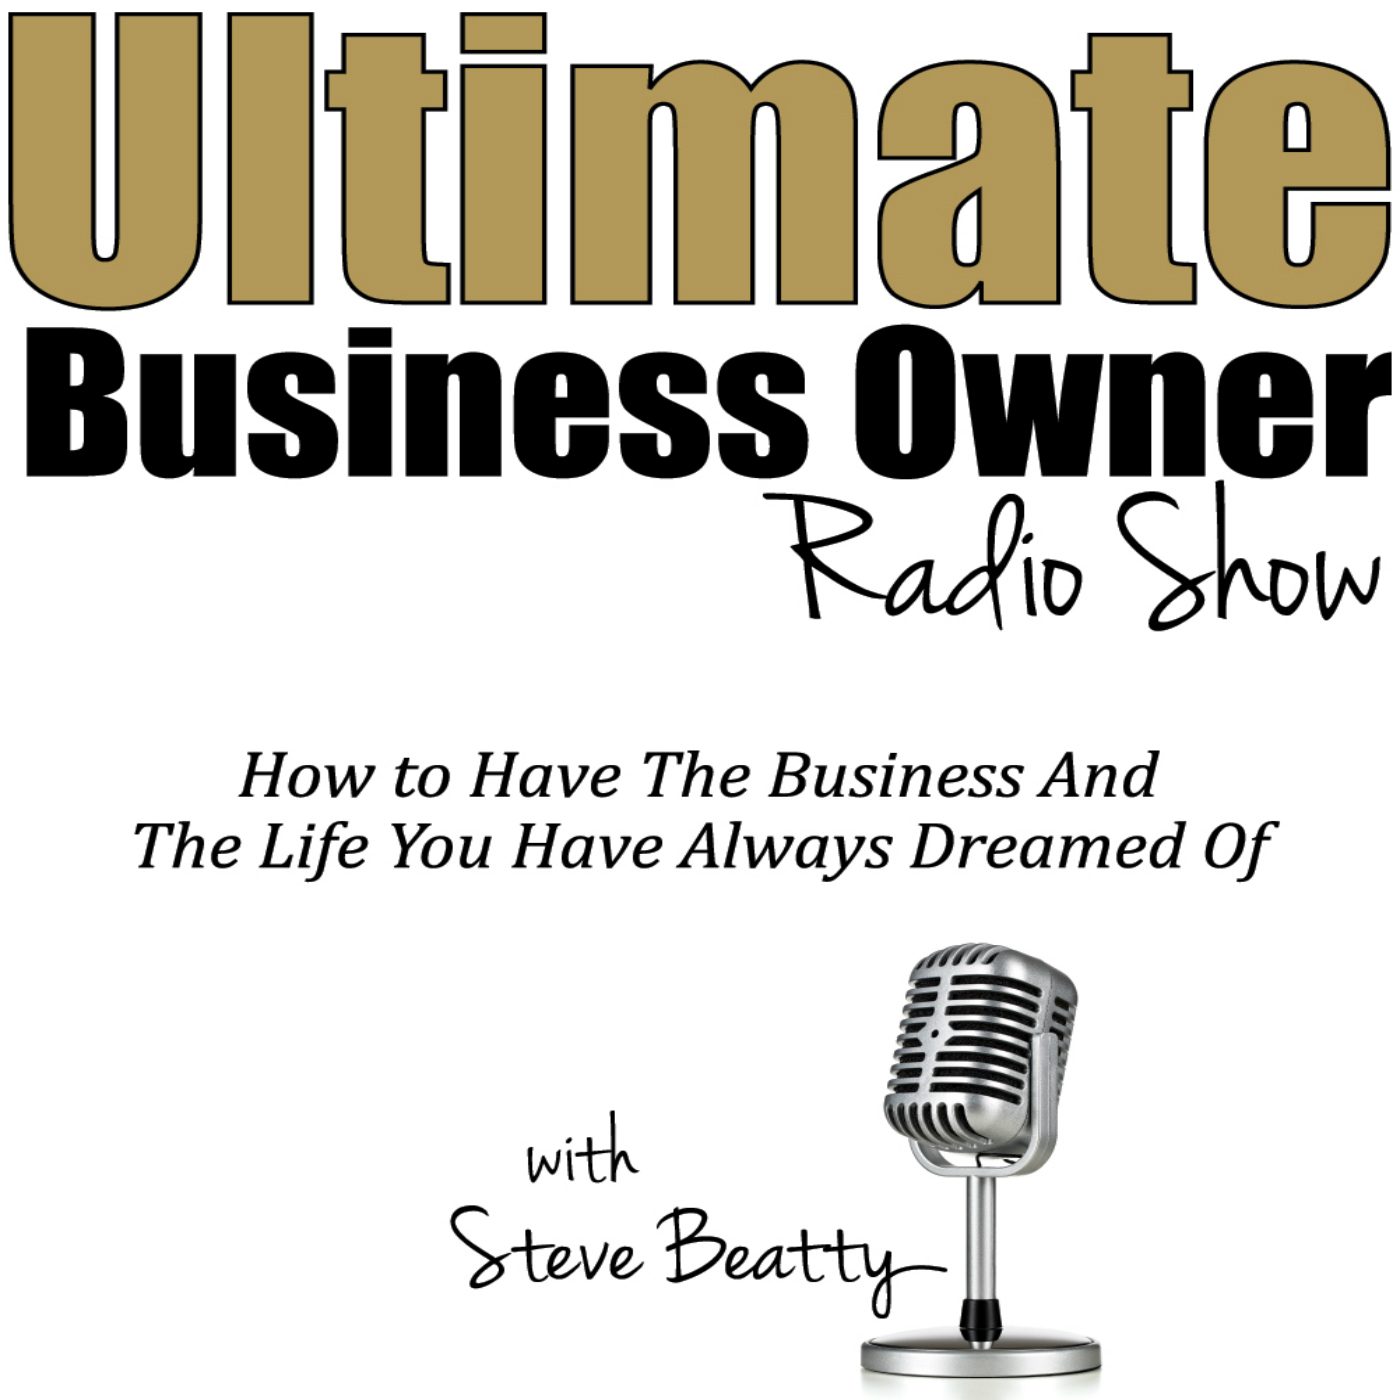 Ultimate Business 20M INTERVIEW: Tax Benefits of a Pension Plan - Jay Beltz